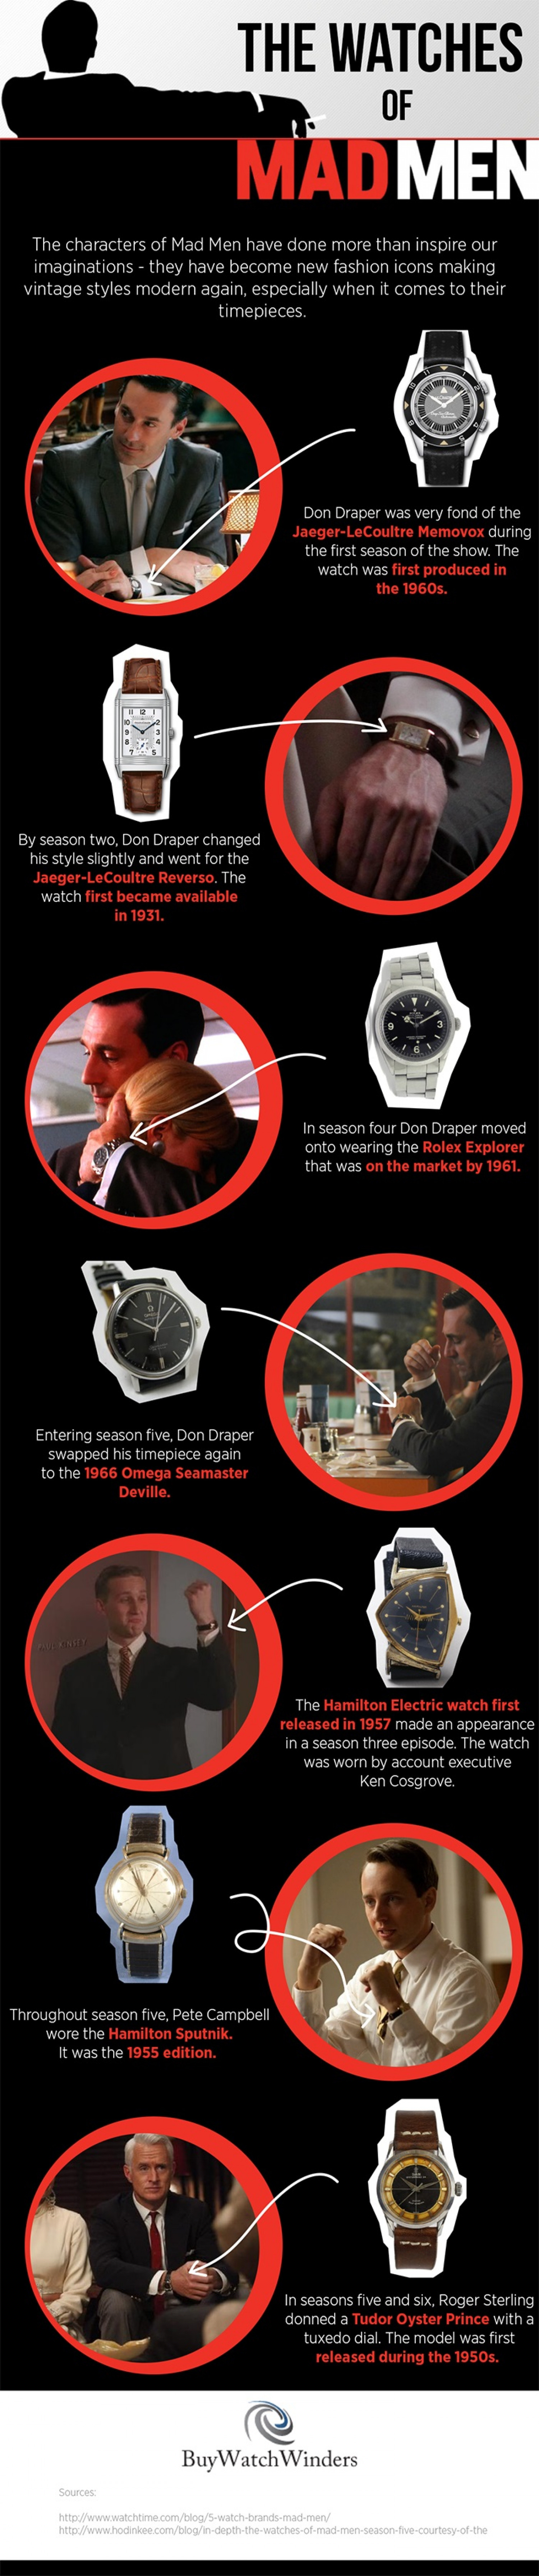 The Watches of Mad Men Infographic